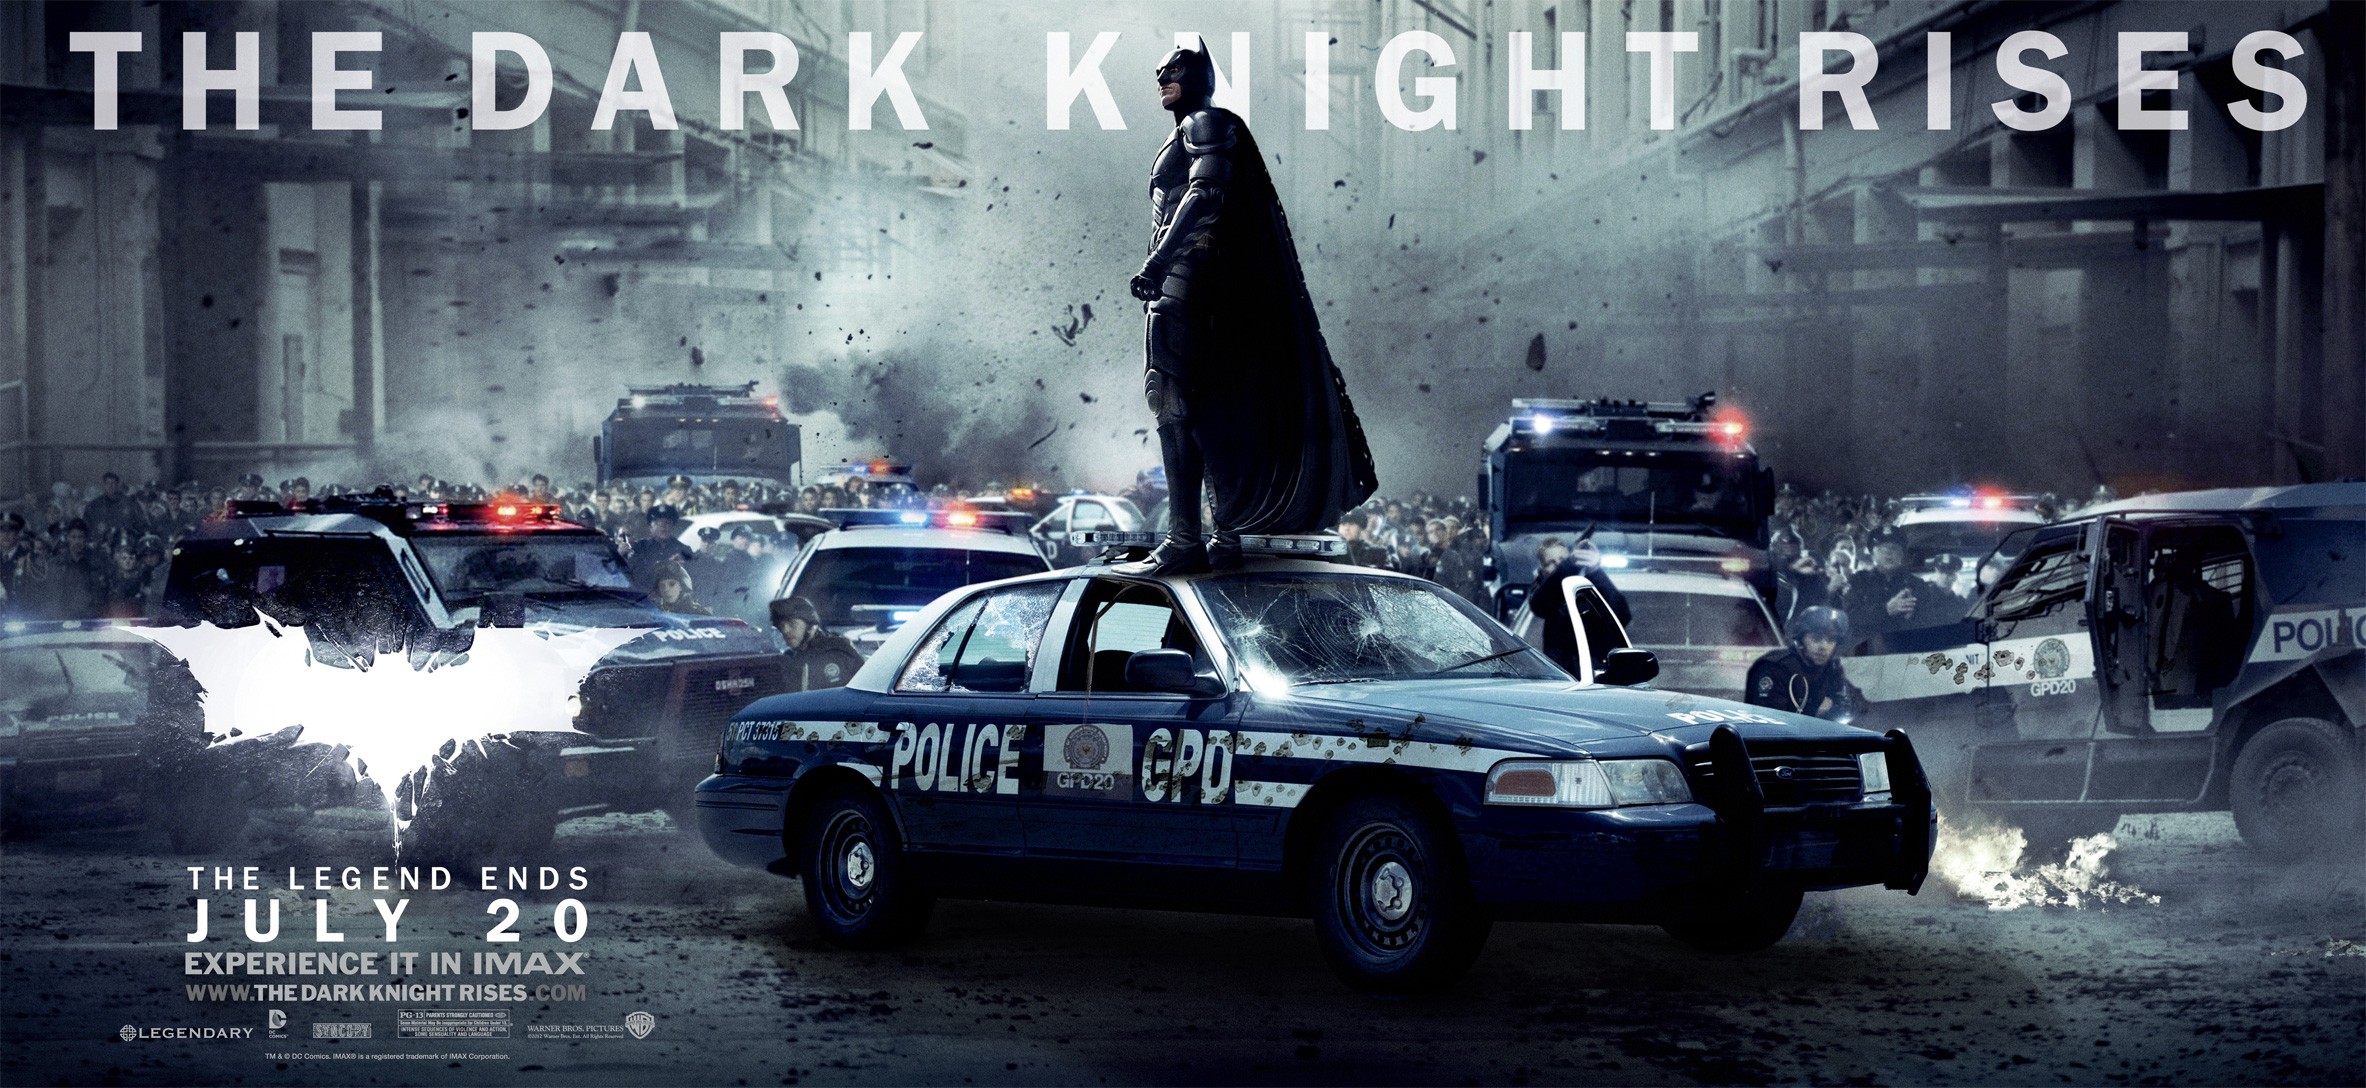 Mega Sized Movie Poster Image for The Dark Knight Rises (#10 of 24)